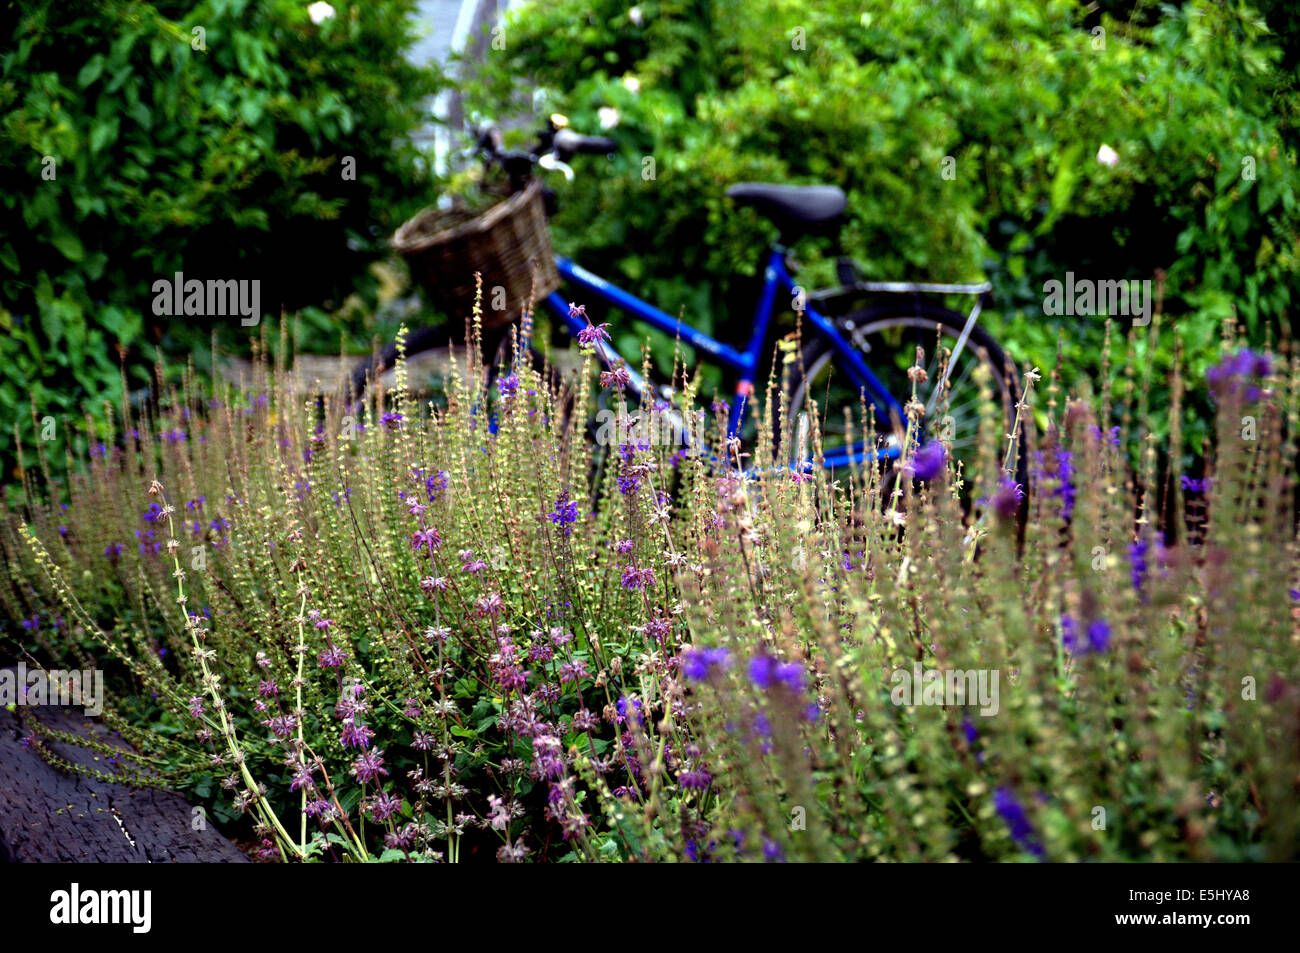 Bicycle in a field of lavender salvia flowers Stock Photo